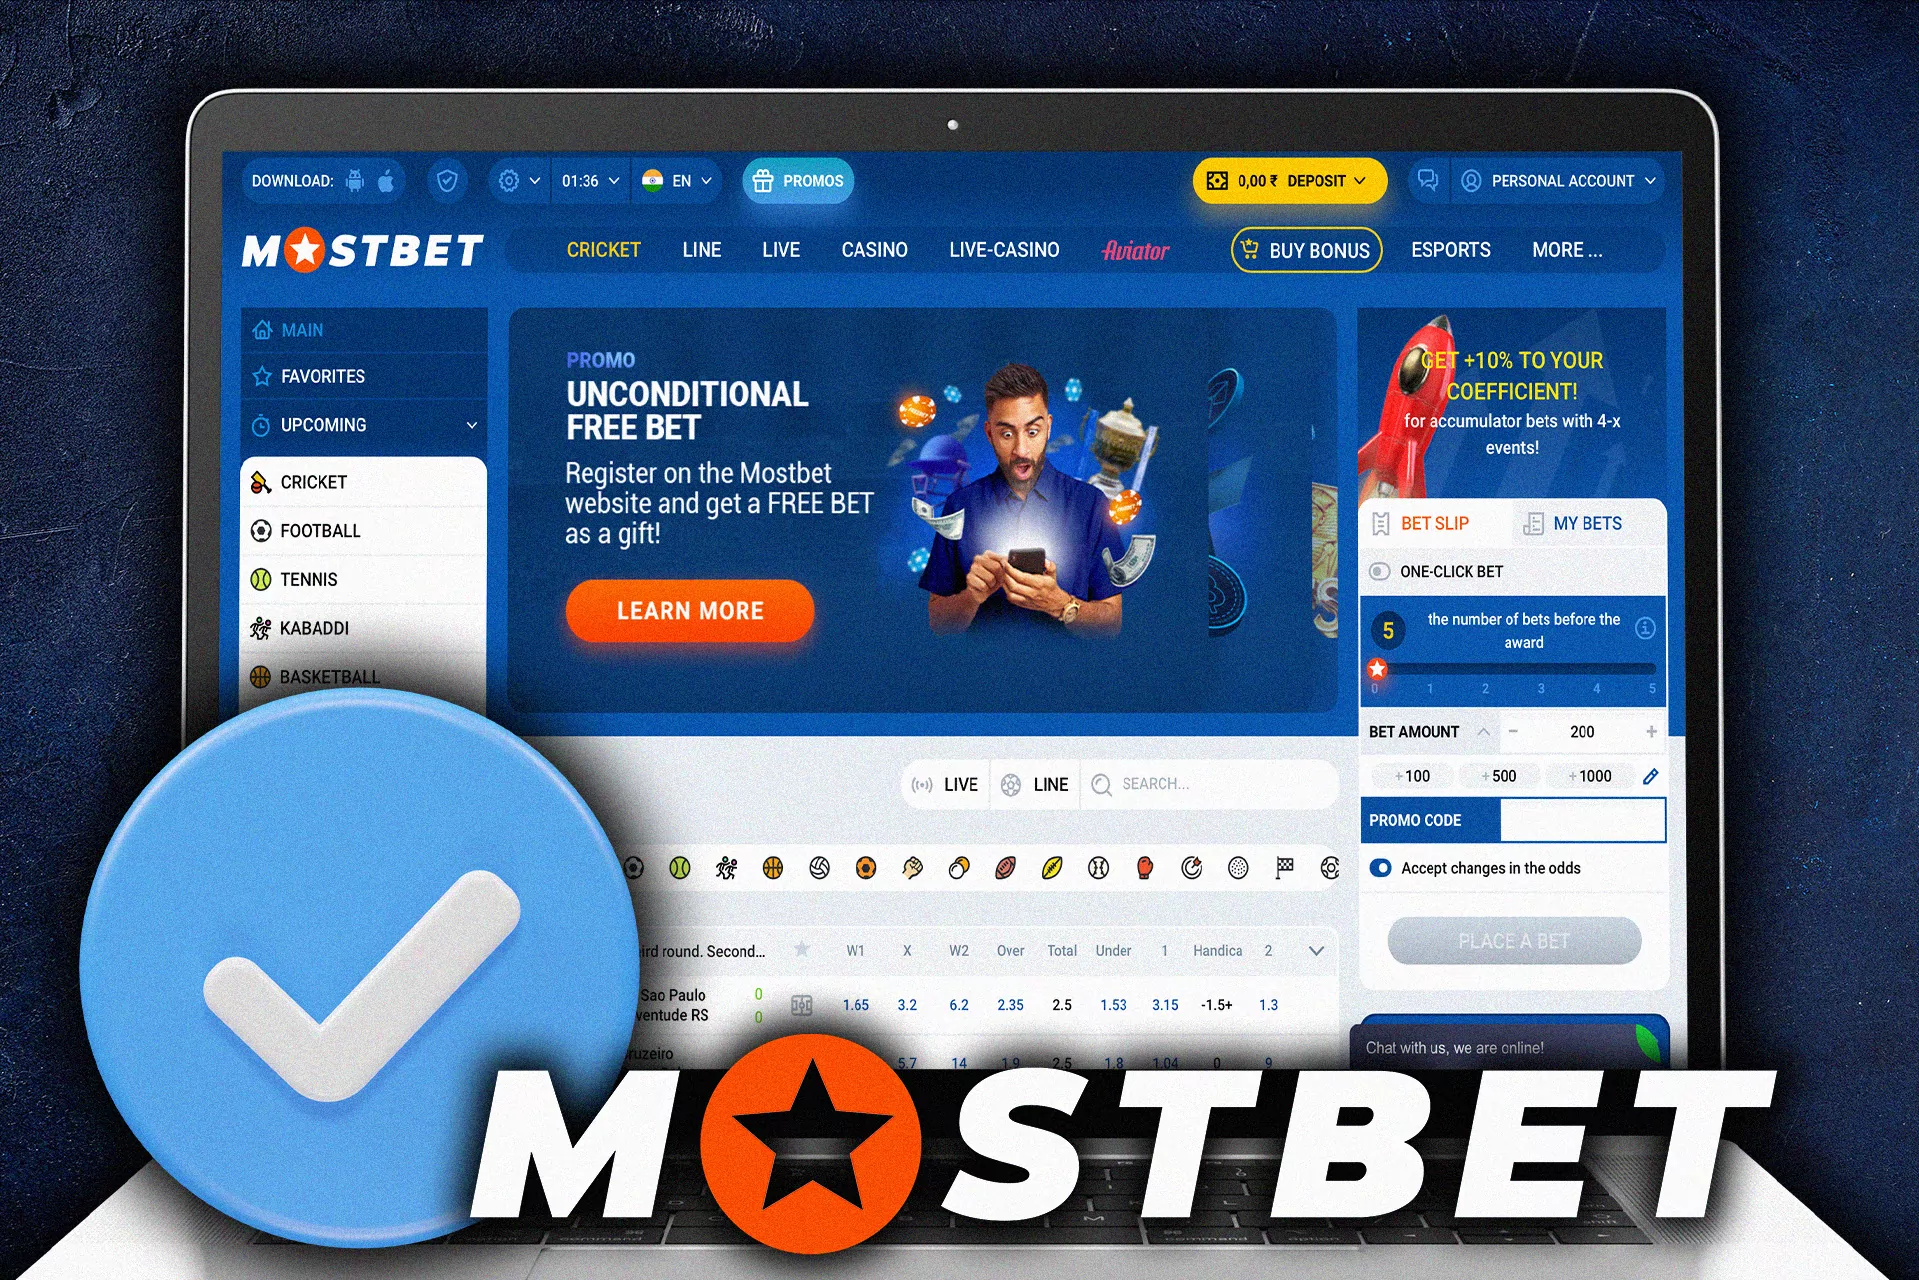 Mostbet operates legally in India.